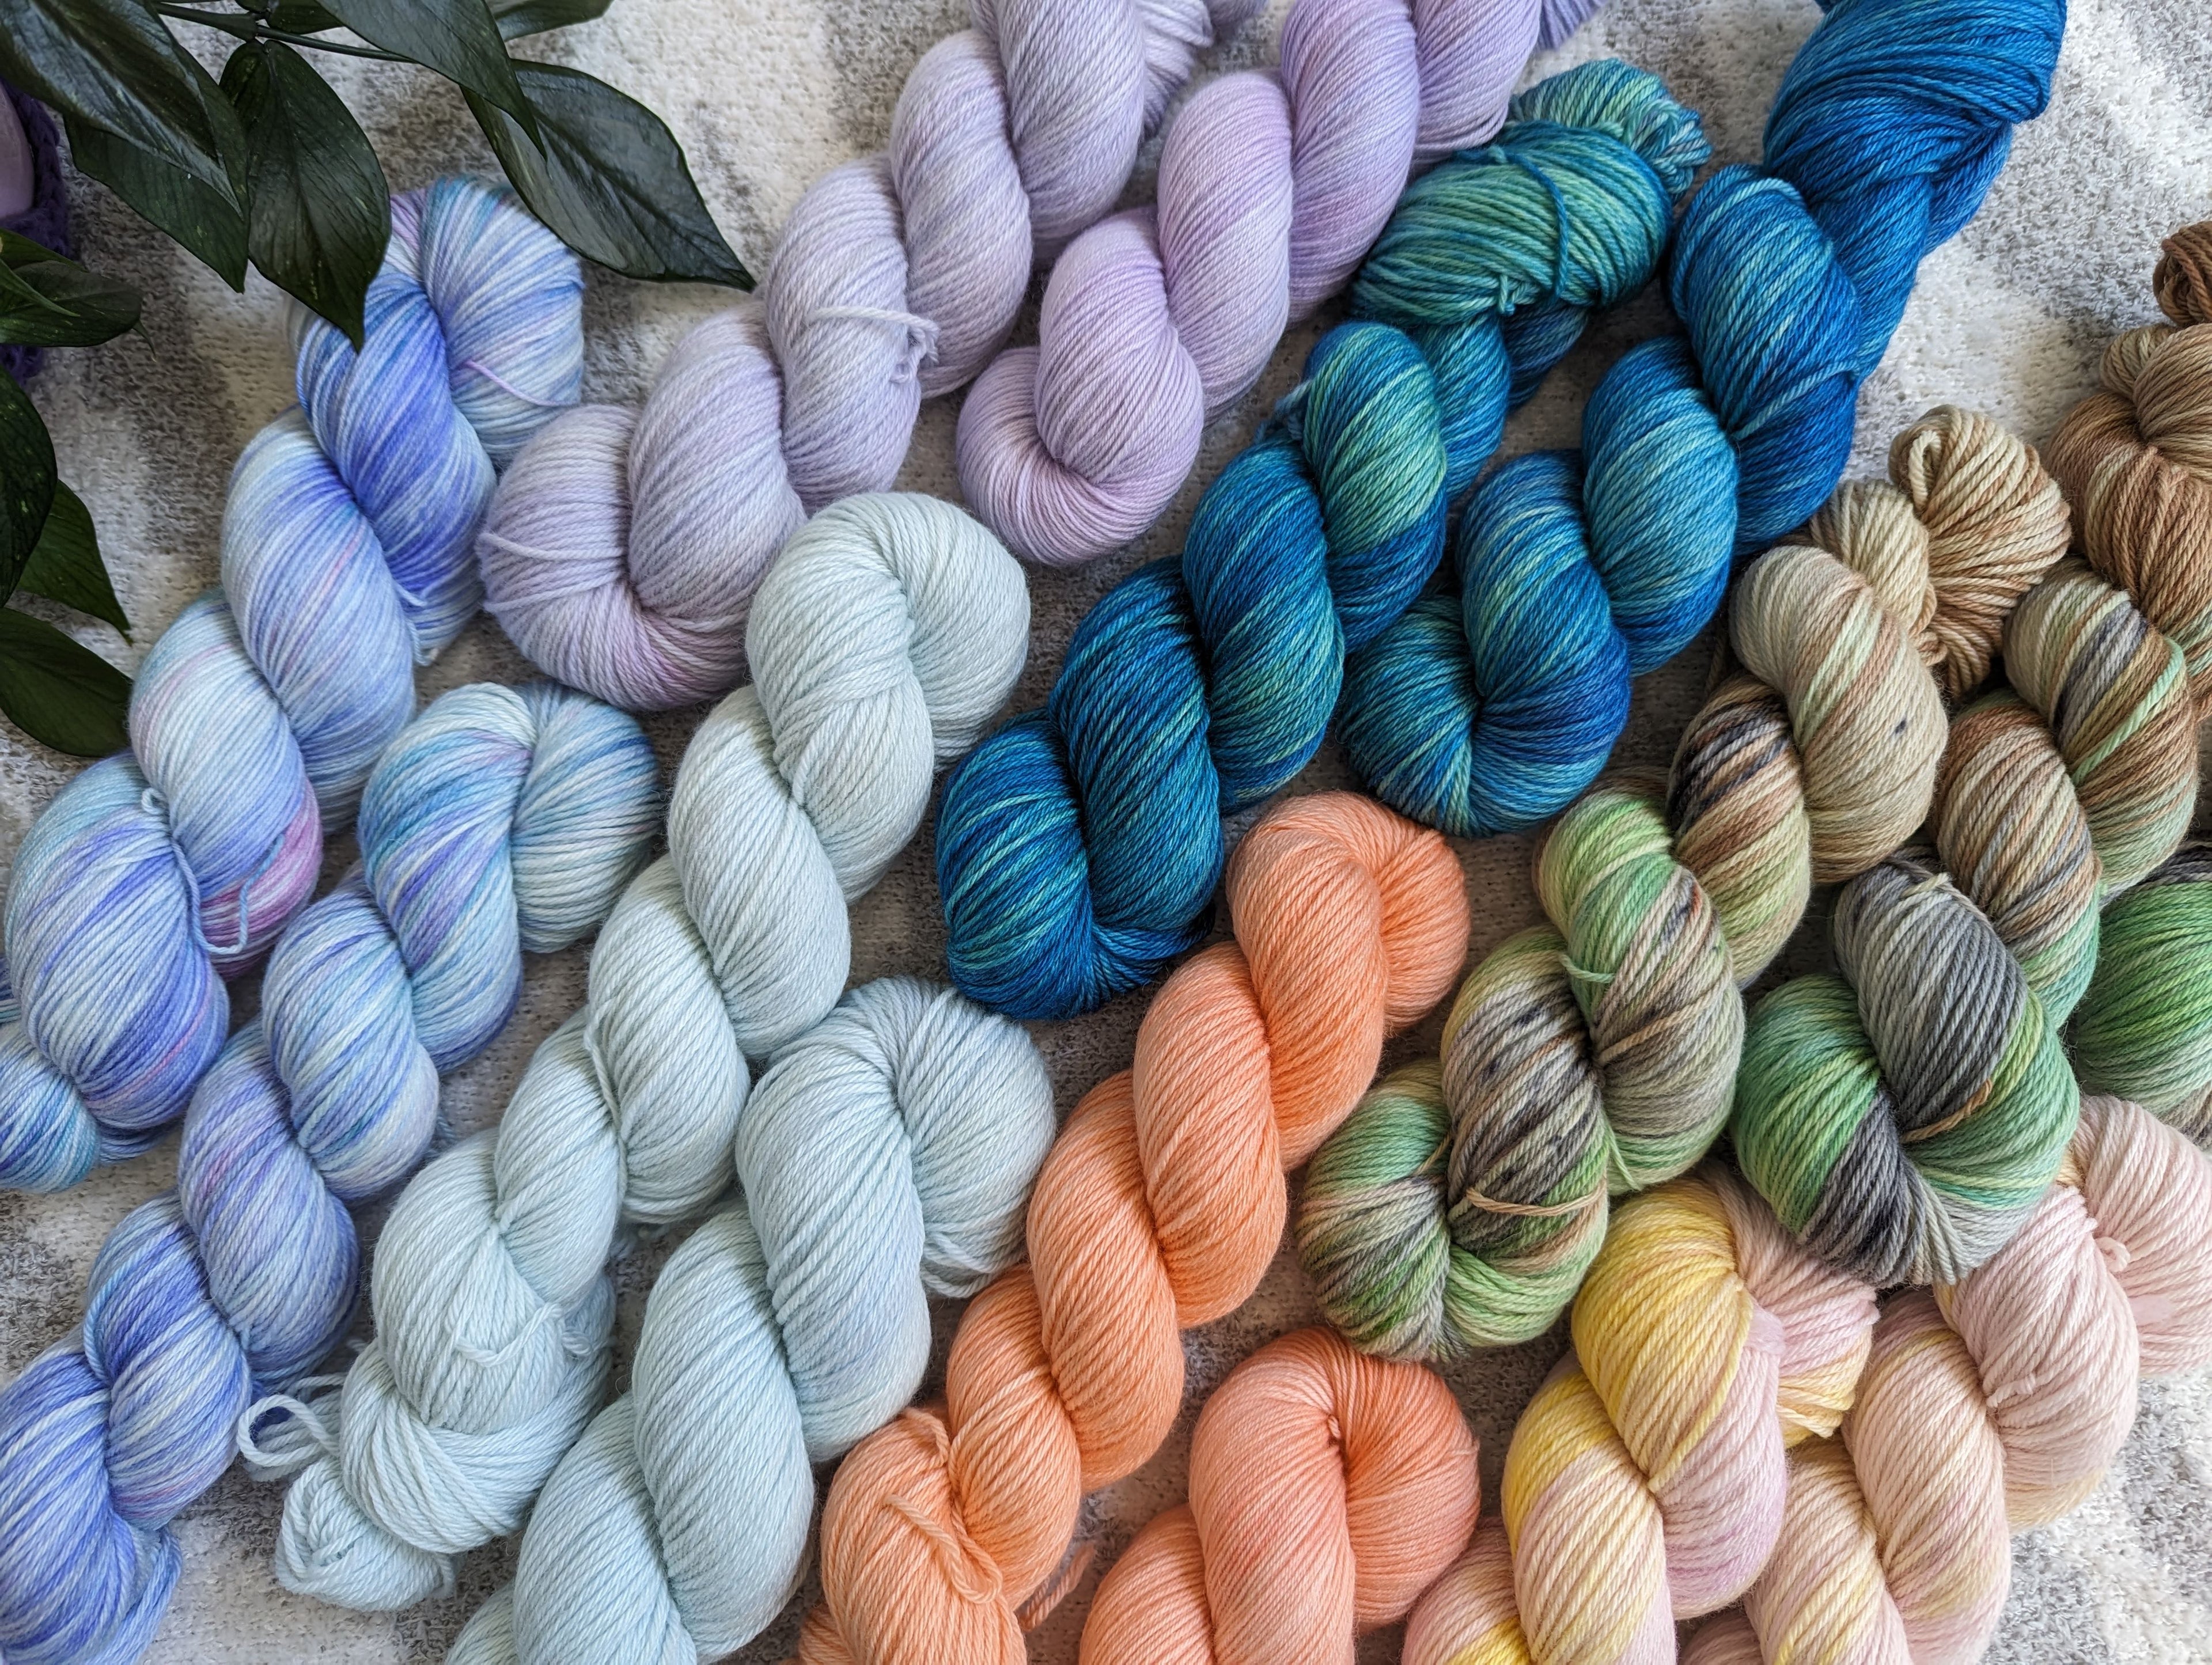 Skeins from the Vines & Branches Collection